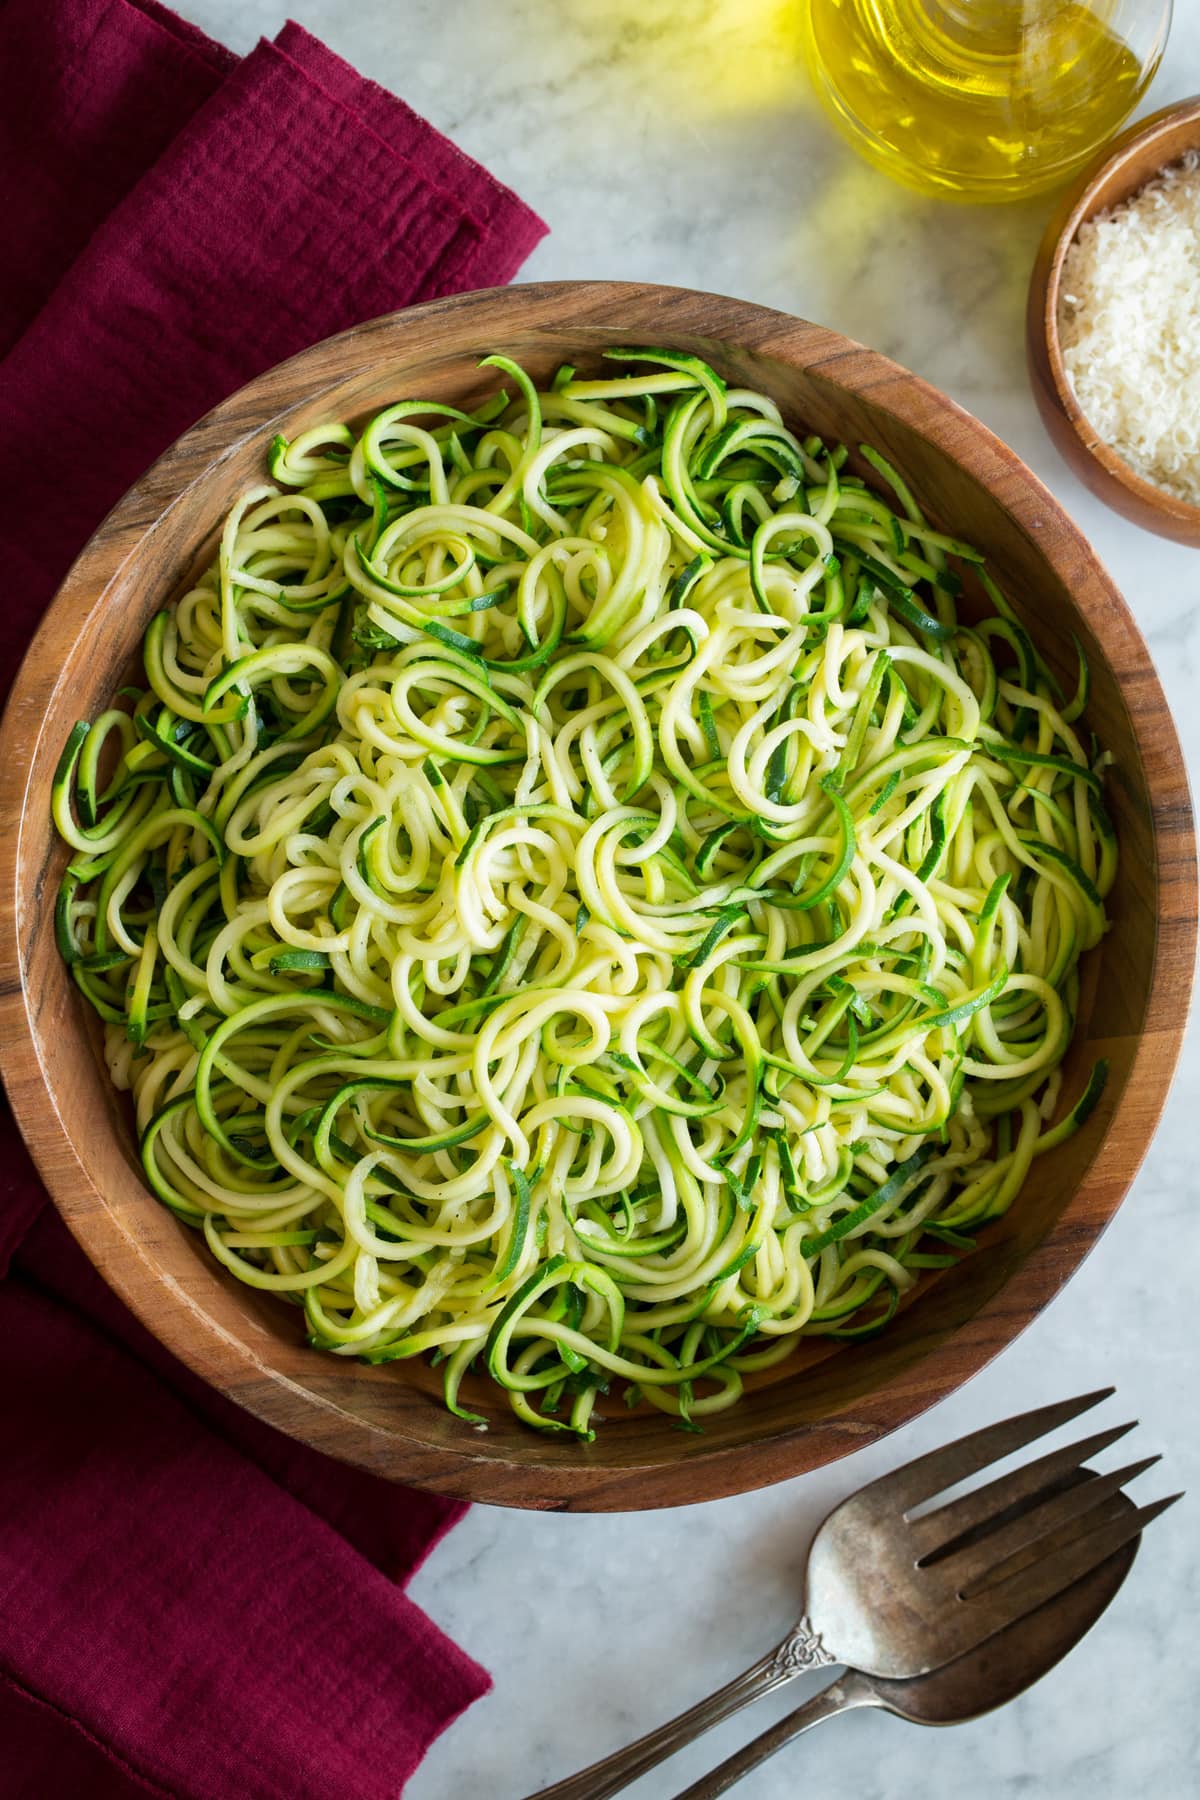 Plain cooked zucchini noodles shown in a wooden bowl on a white marble surface.